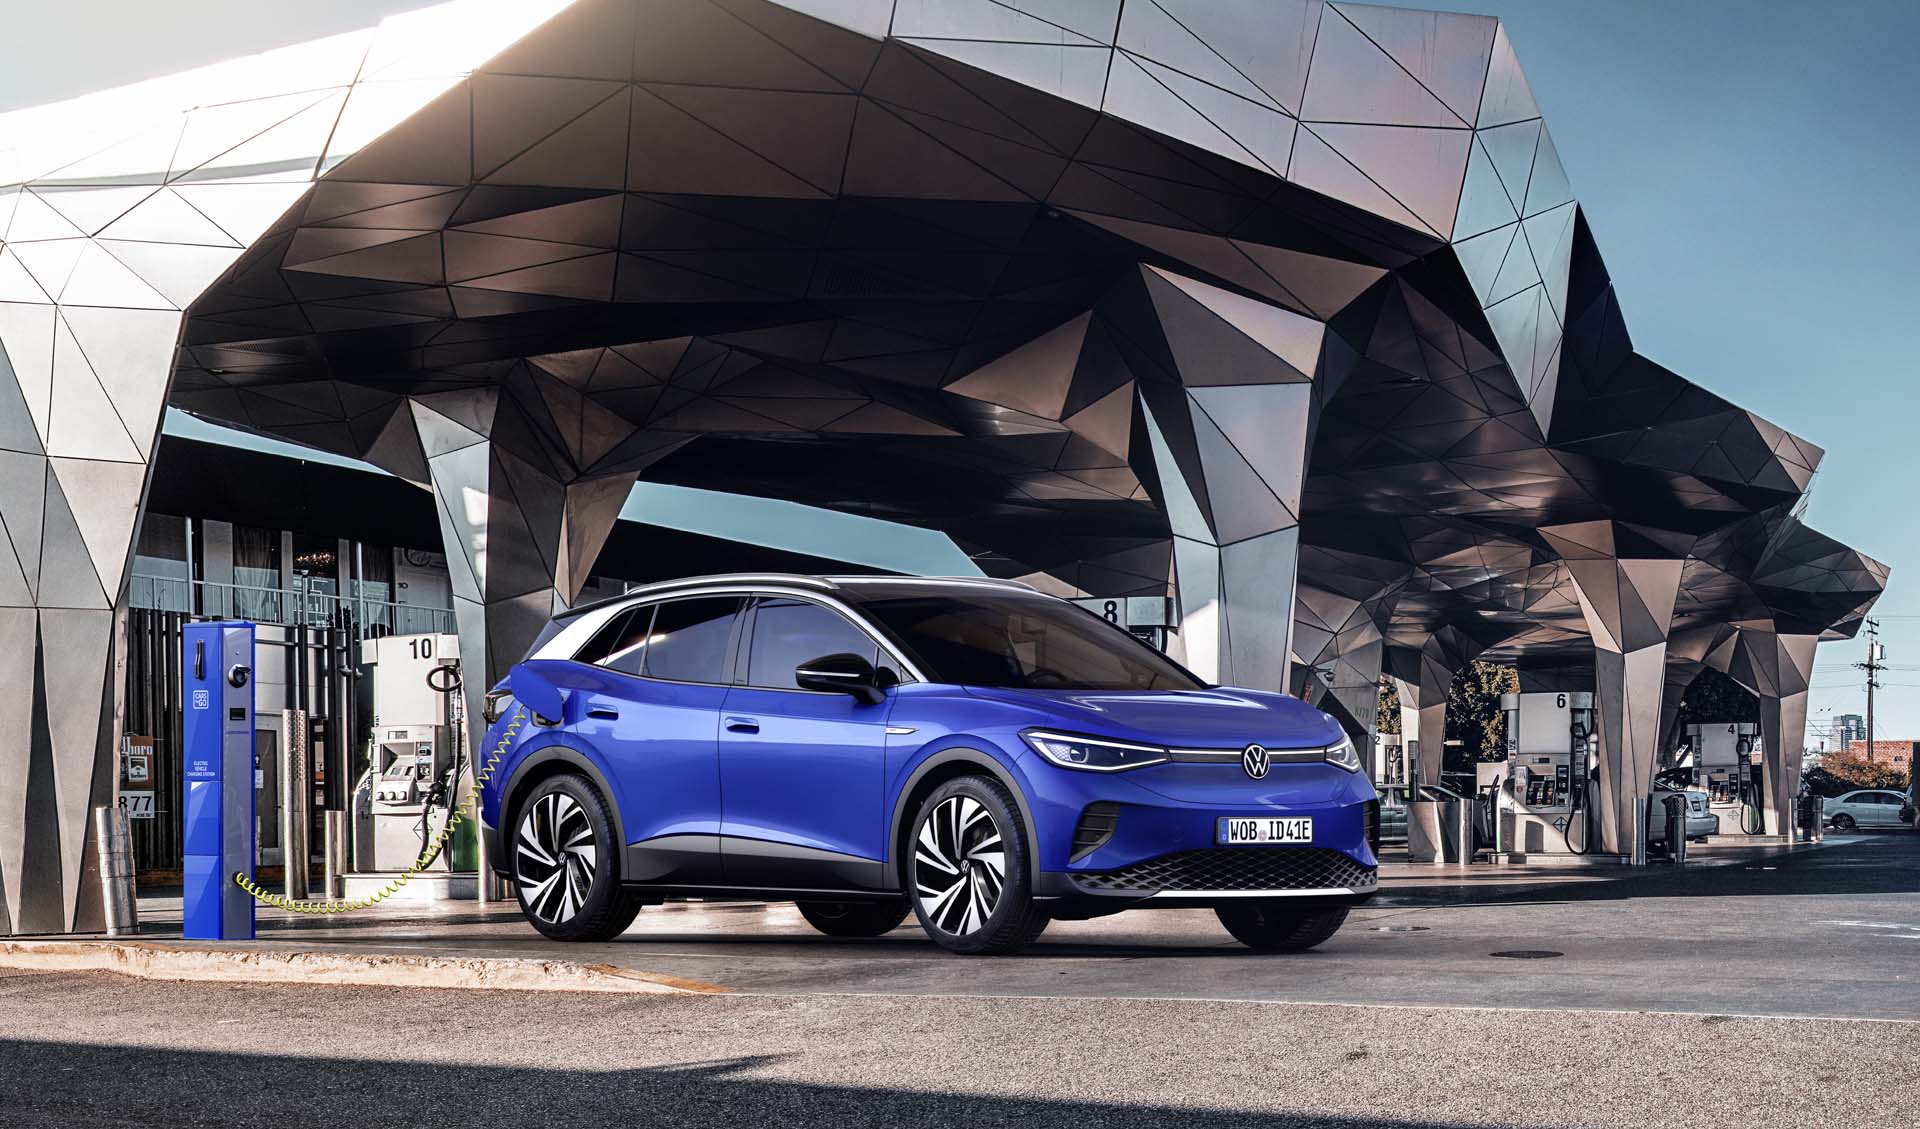 2021 VW ID.4 revealed: 250-mile electric SUV starts at $41,490